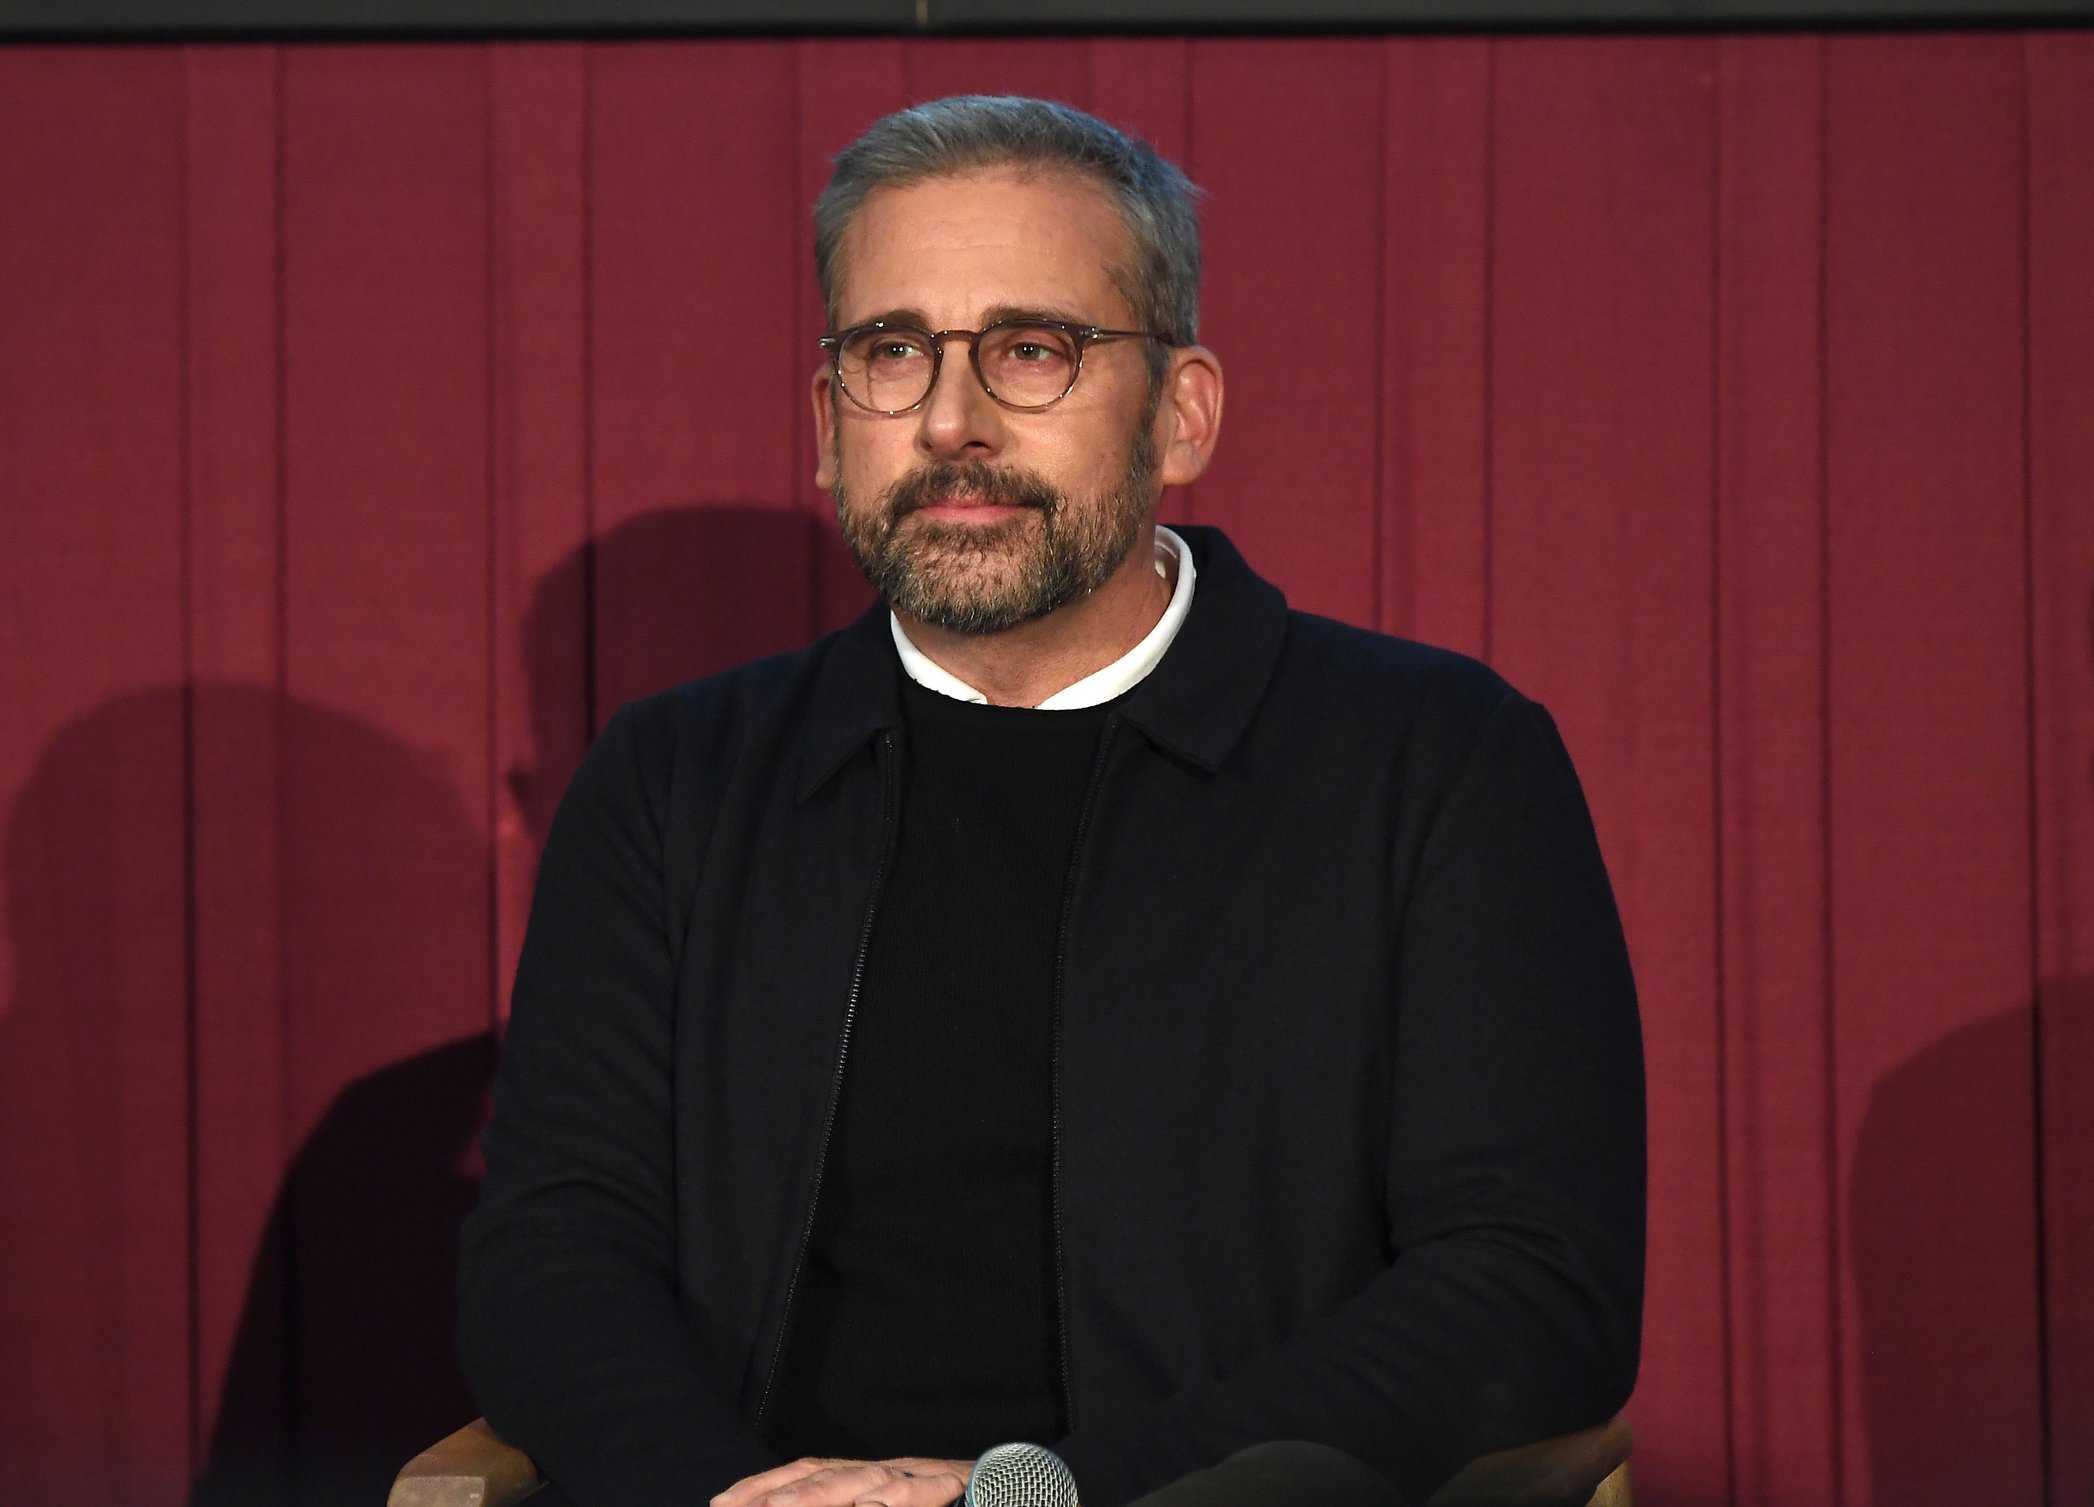 Steve Carell at "Welcome To Marwen" screening